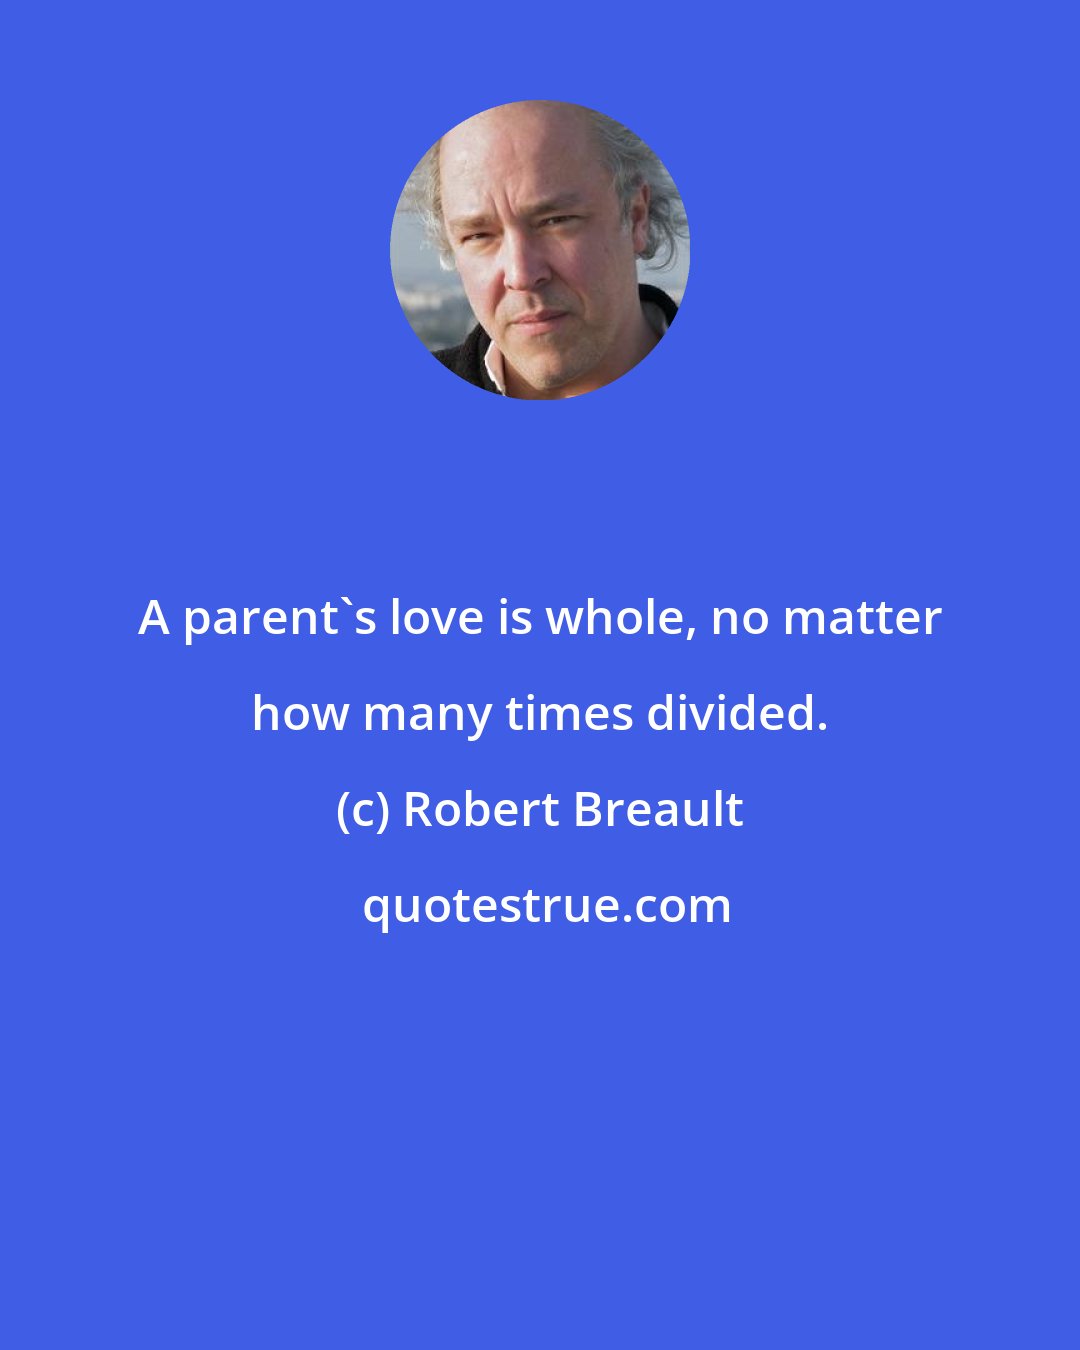 Robert Breault: A parent's love is whole, no matter how many times divided.